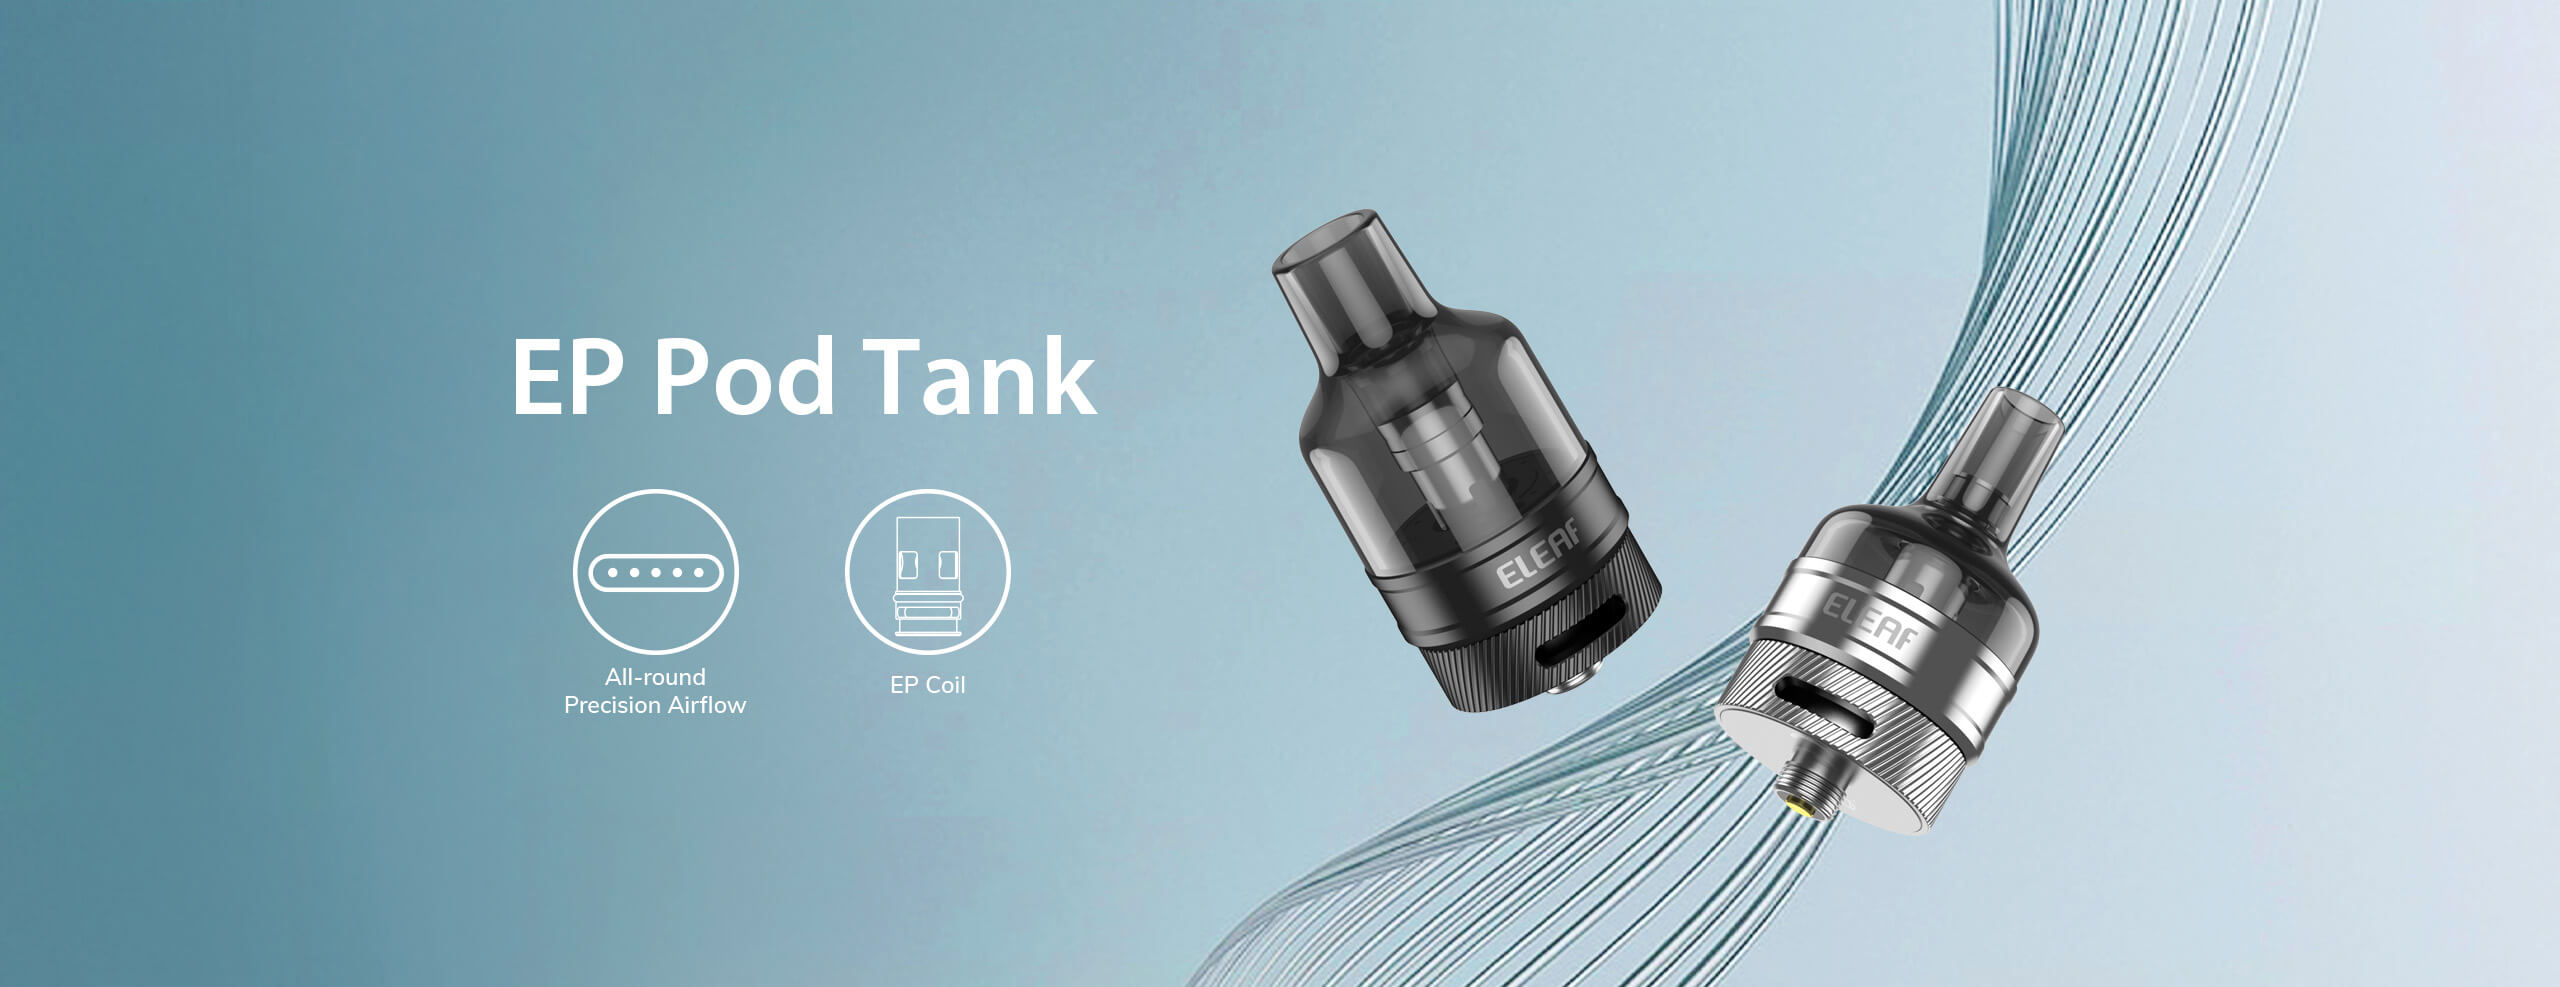 The Eleaf EP Pod Tank, with 2ml and 5ml options, offers adjustable airflow and compatibility with the latest EP coils, ensuring delidious flavor in your vaping experience.